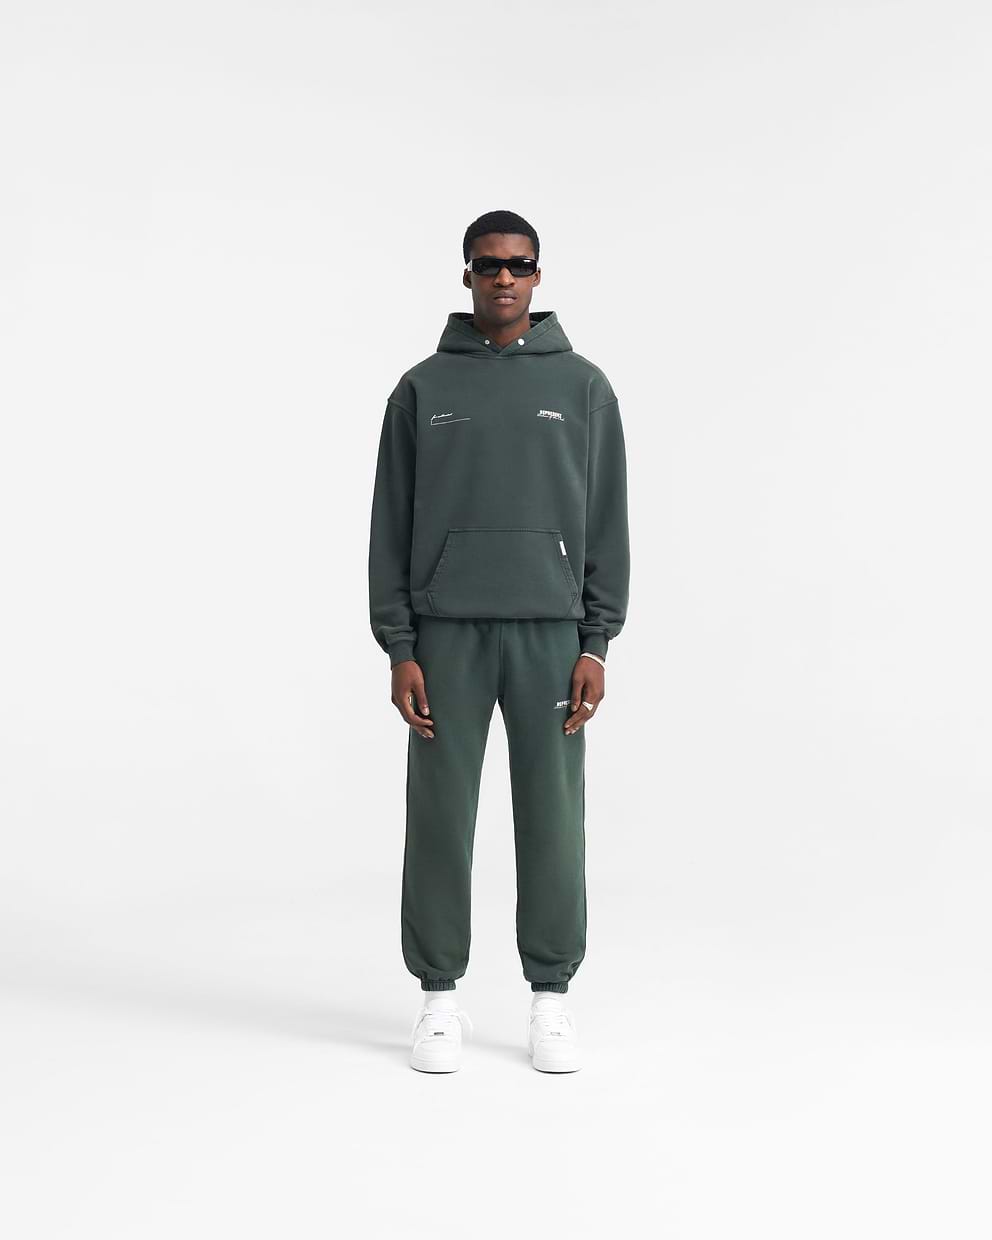 Patron Of The Club Hoodie - Forest Green